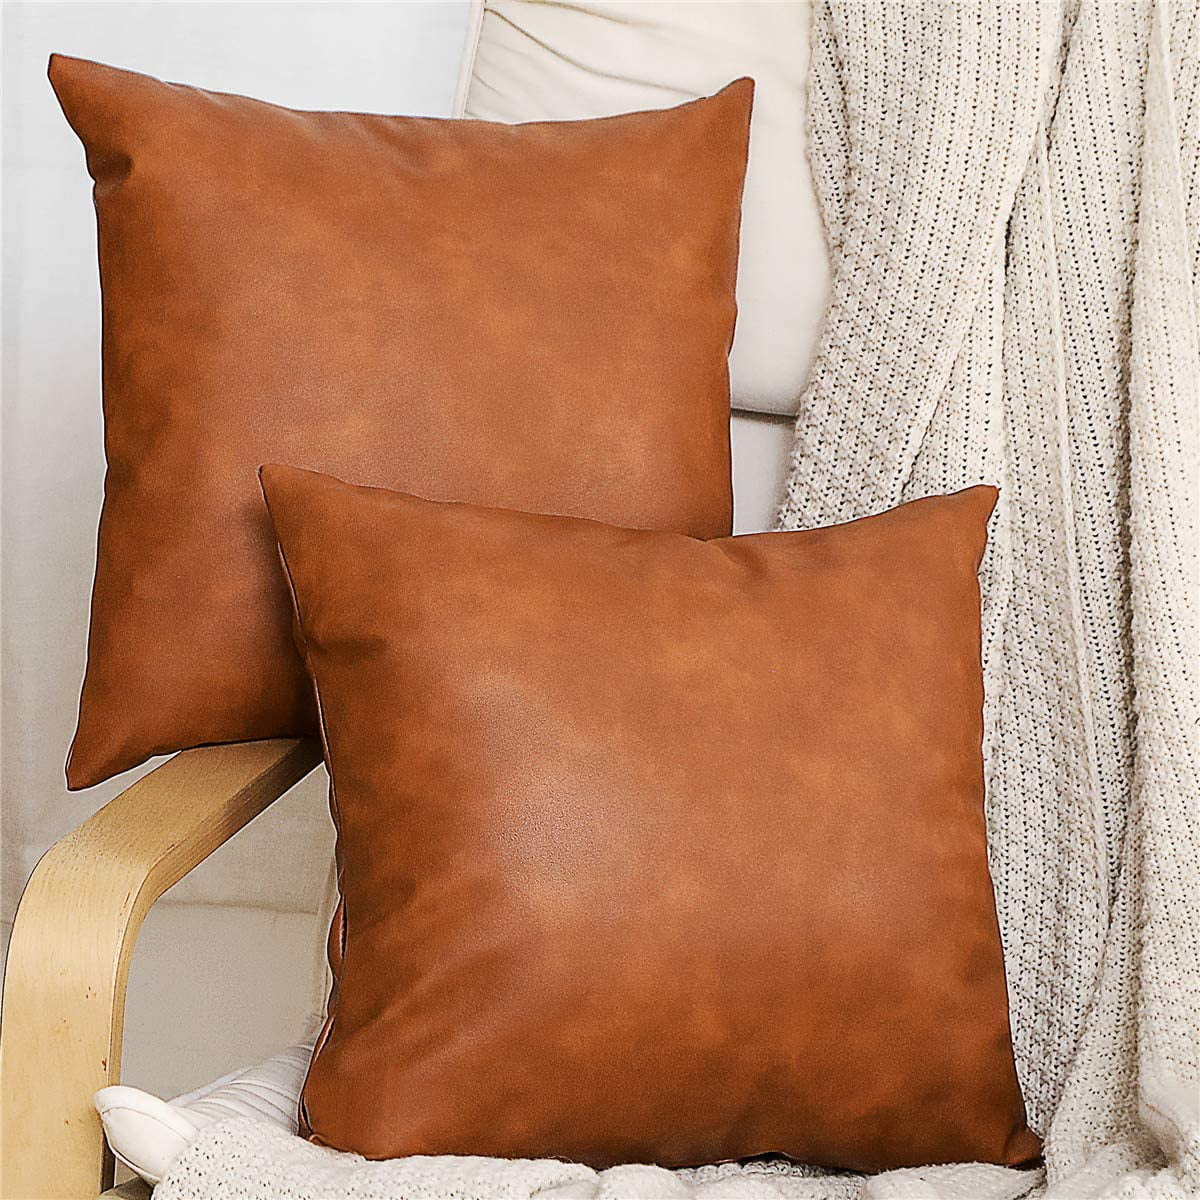 Decorx Faux Leather Throw Pillow Covers, Zippered Leather Couch Cushion Covers